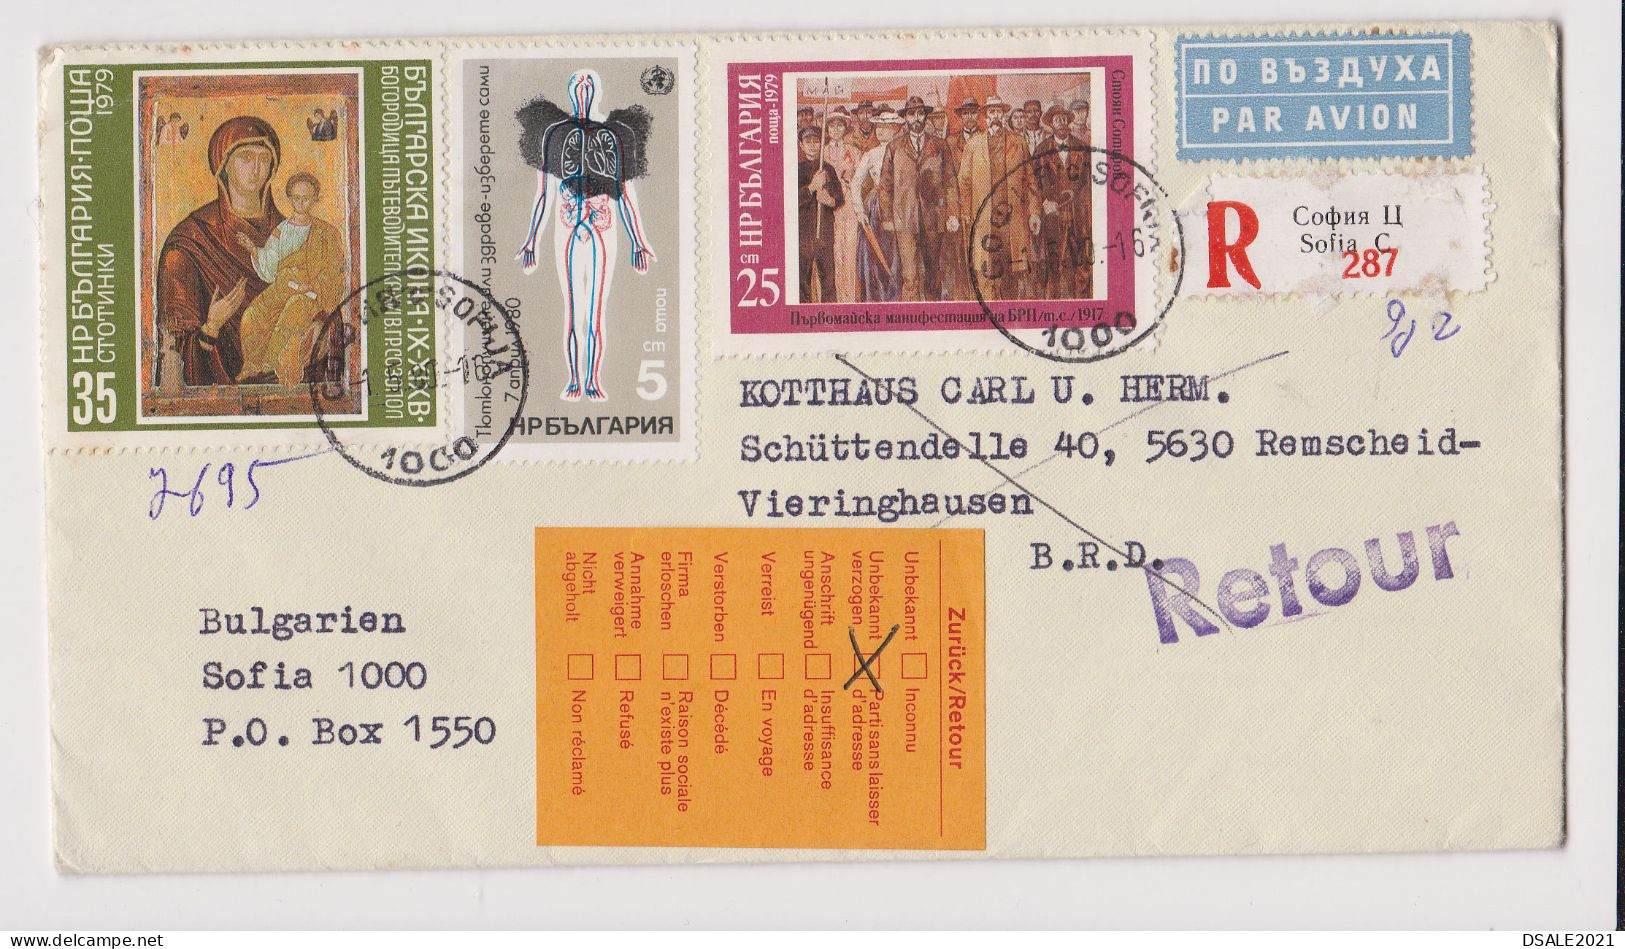 Bulgaria Bulgarien 1980 Registered Airmail Cover W/Colorful Topic Stamps Sent To Germany BRD, Return To Sender (66311) - Briefe U. Dokumente